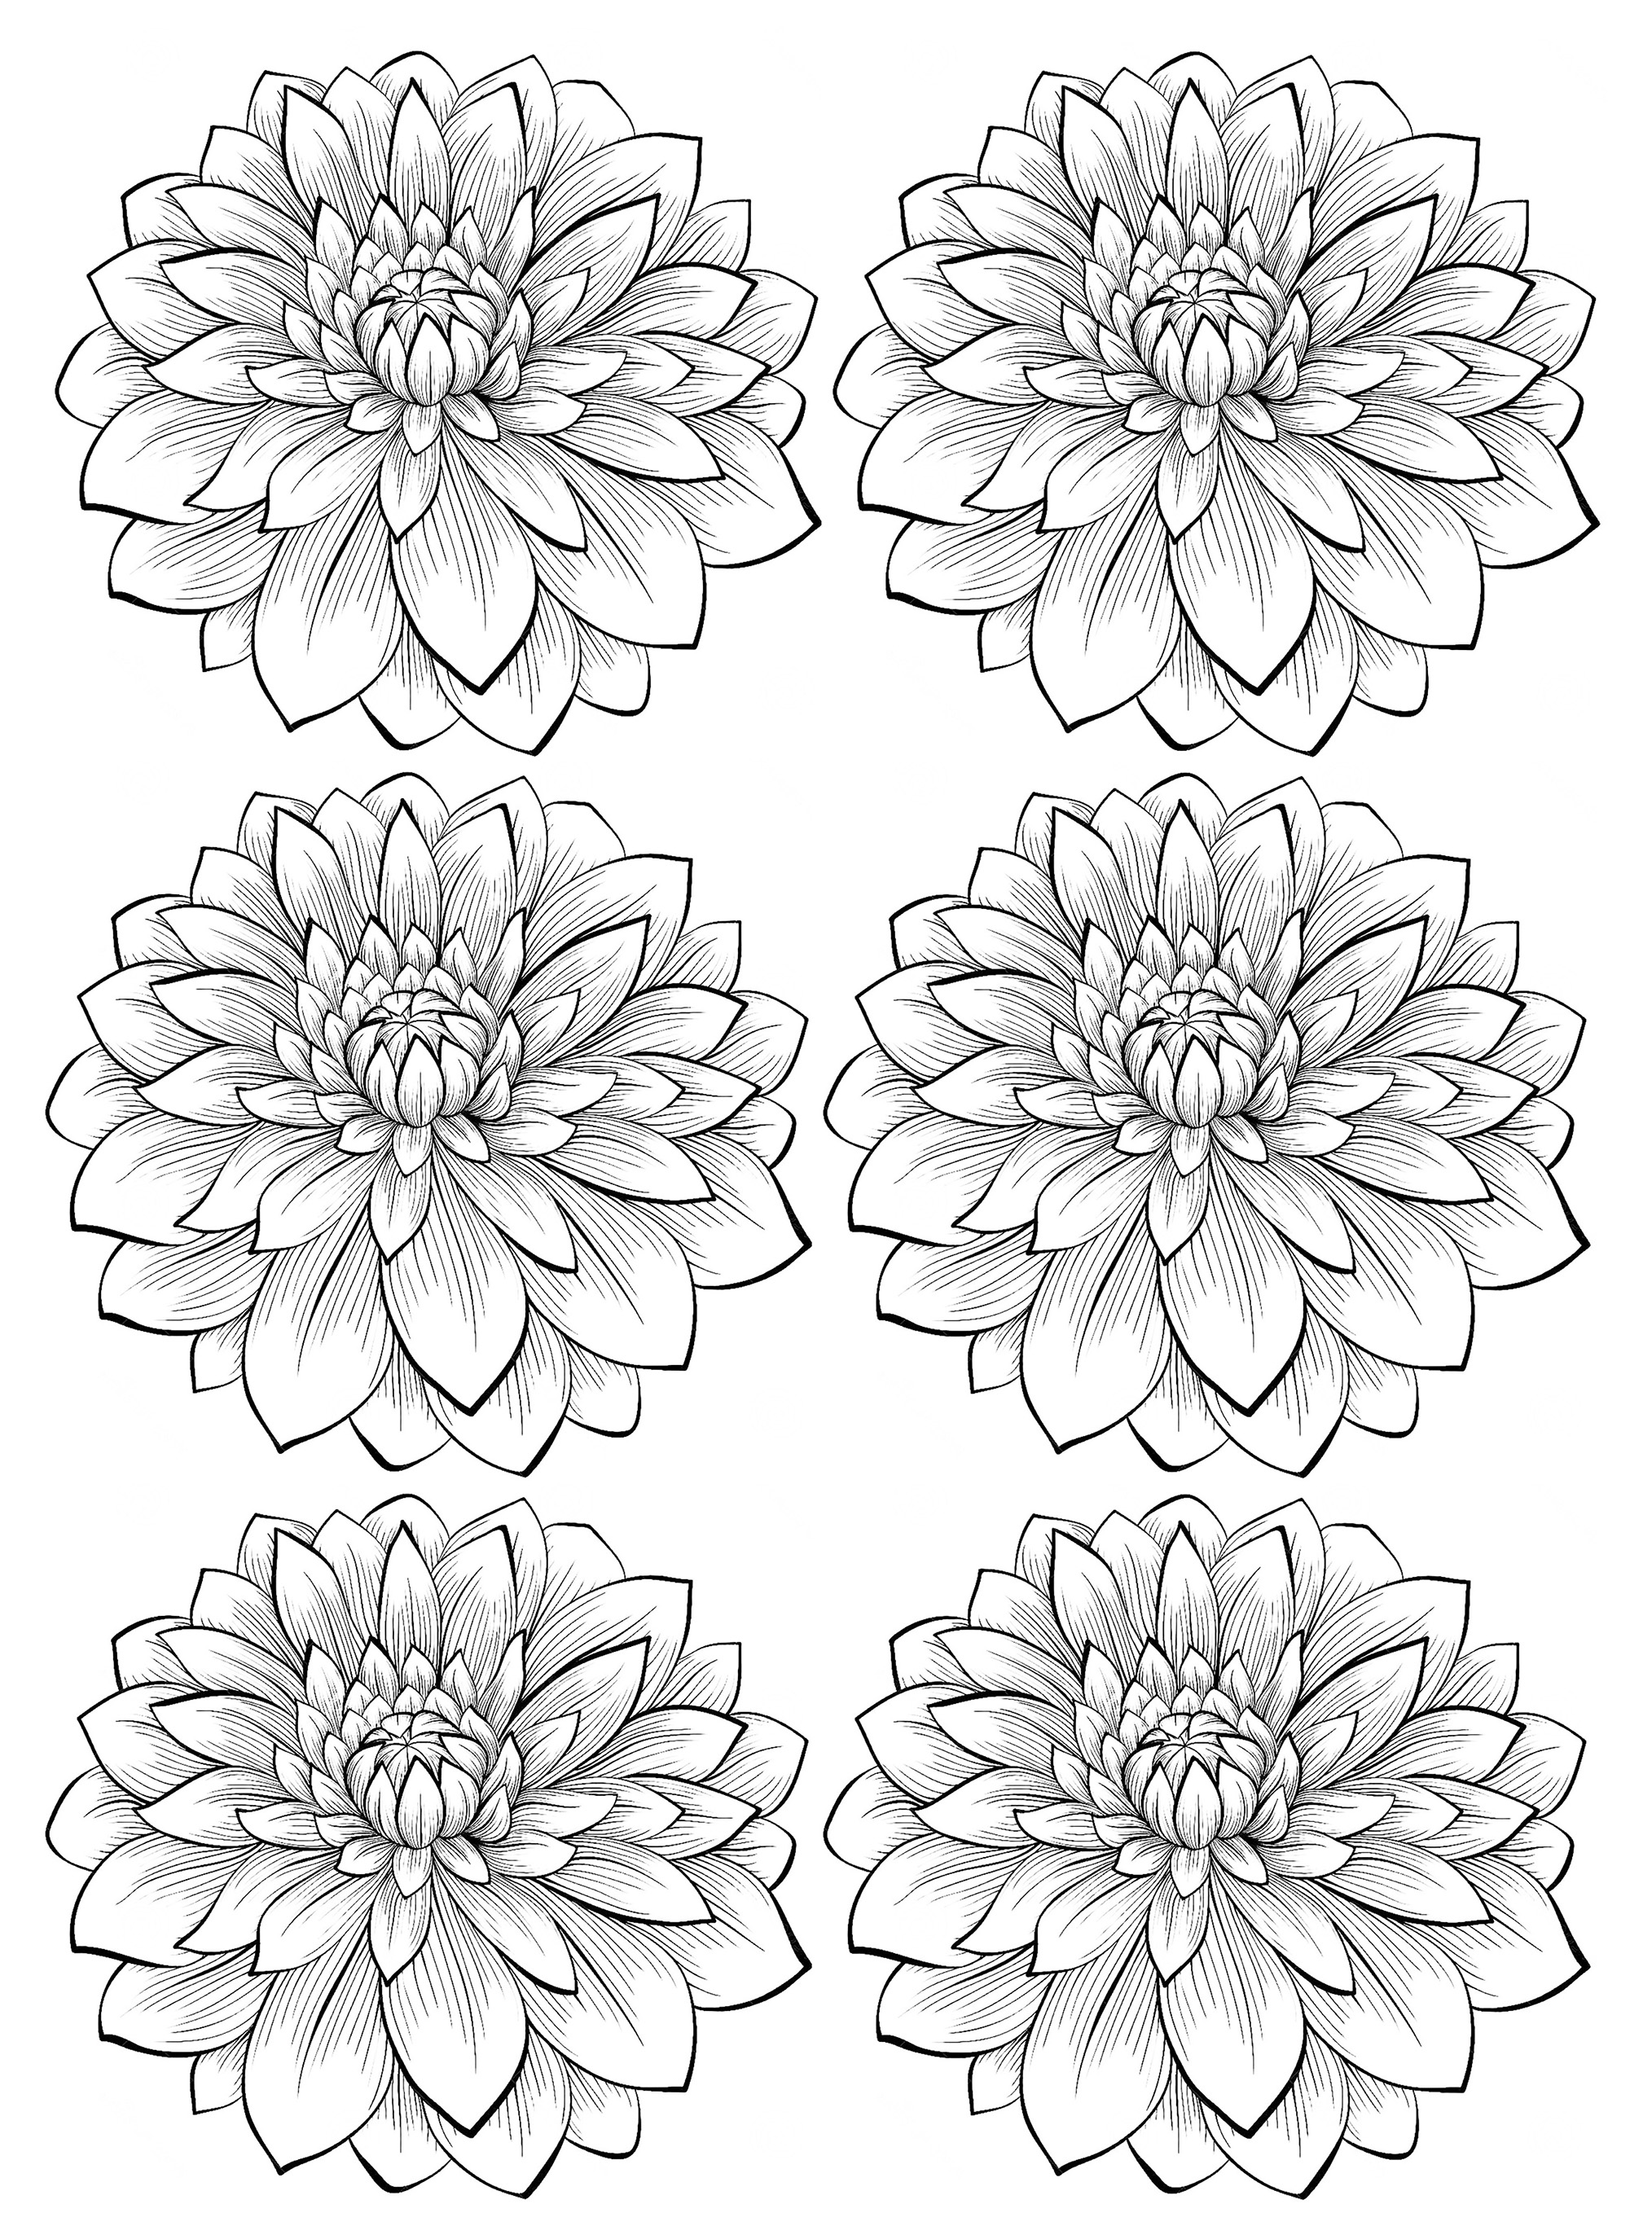 Six dahlia flower - Flowers Adult Coloring Pages